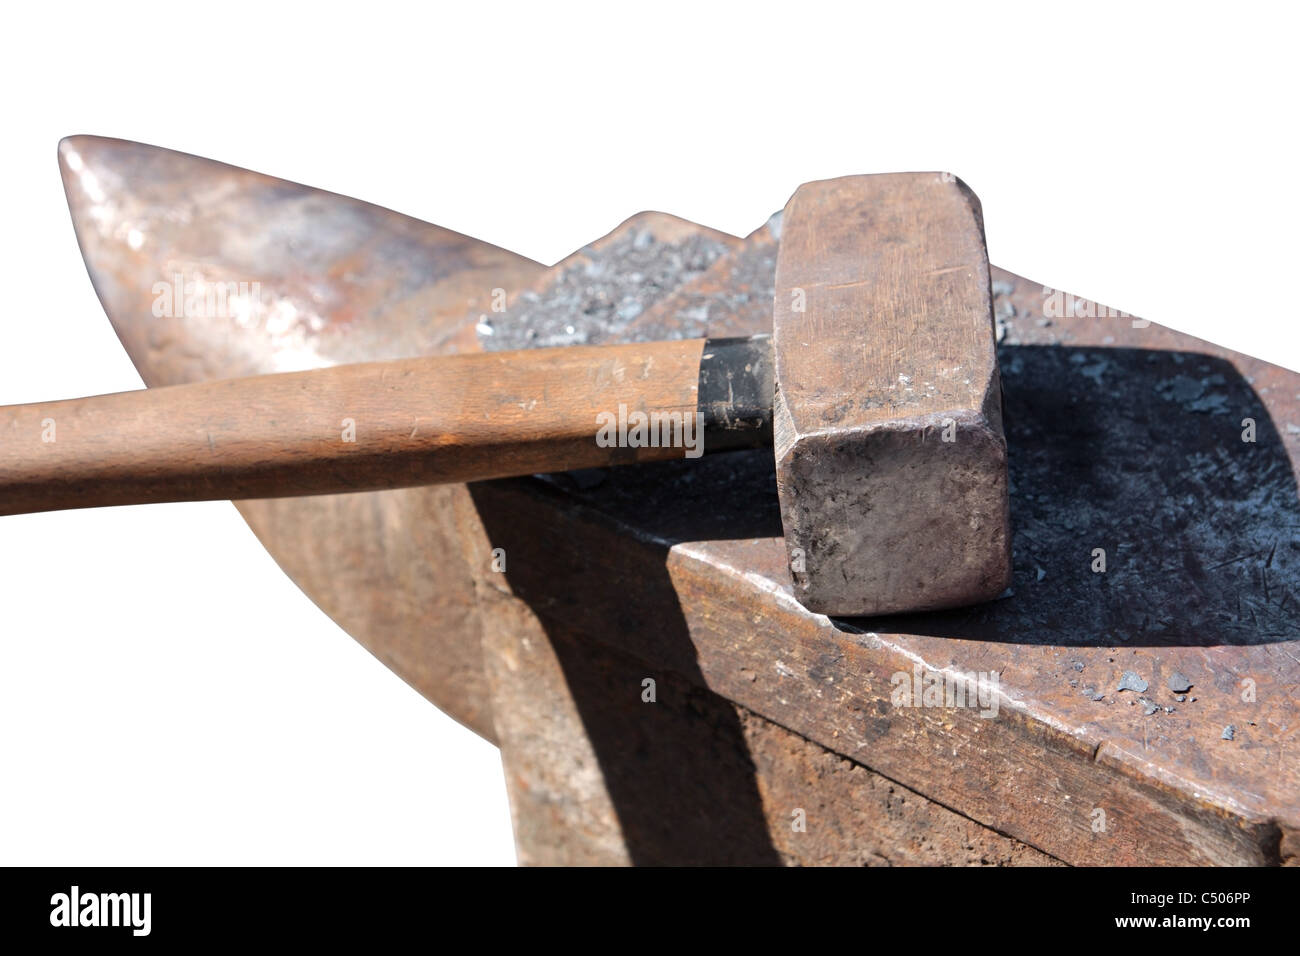 The tool of the smith, hammer and anvil on a white background Stock Photo -  Alamy